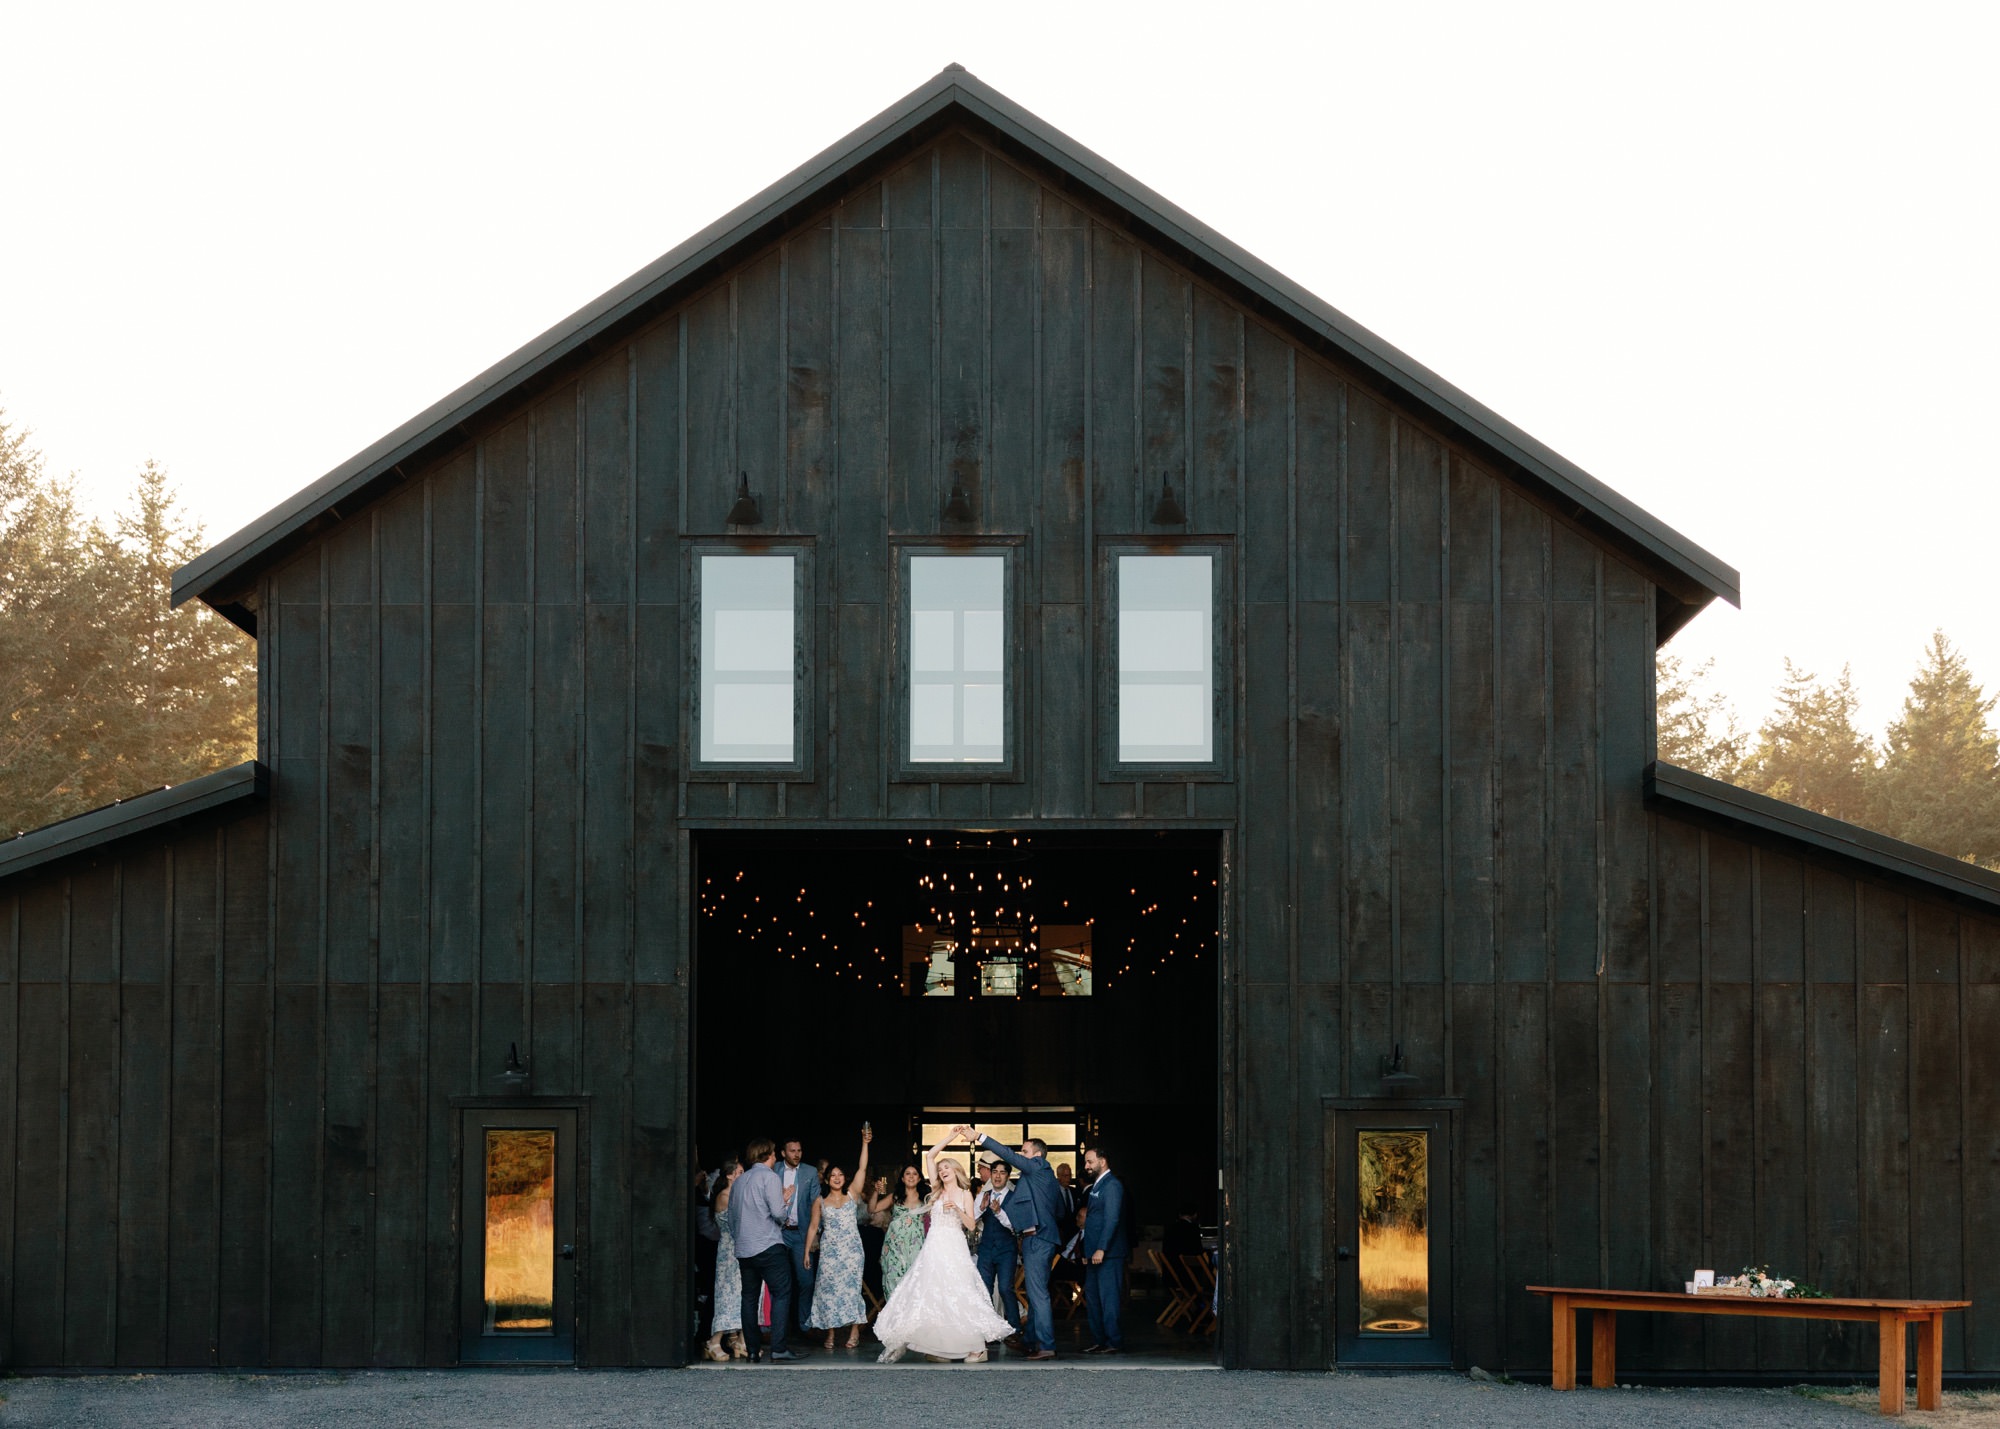 A couple and their wedding guests dance inside the barn at Saltwater Farm on San Juan Island.